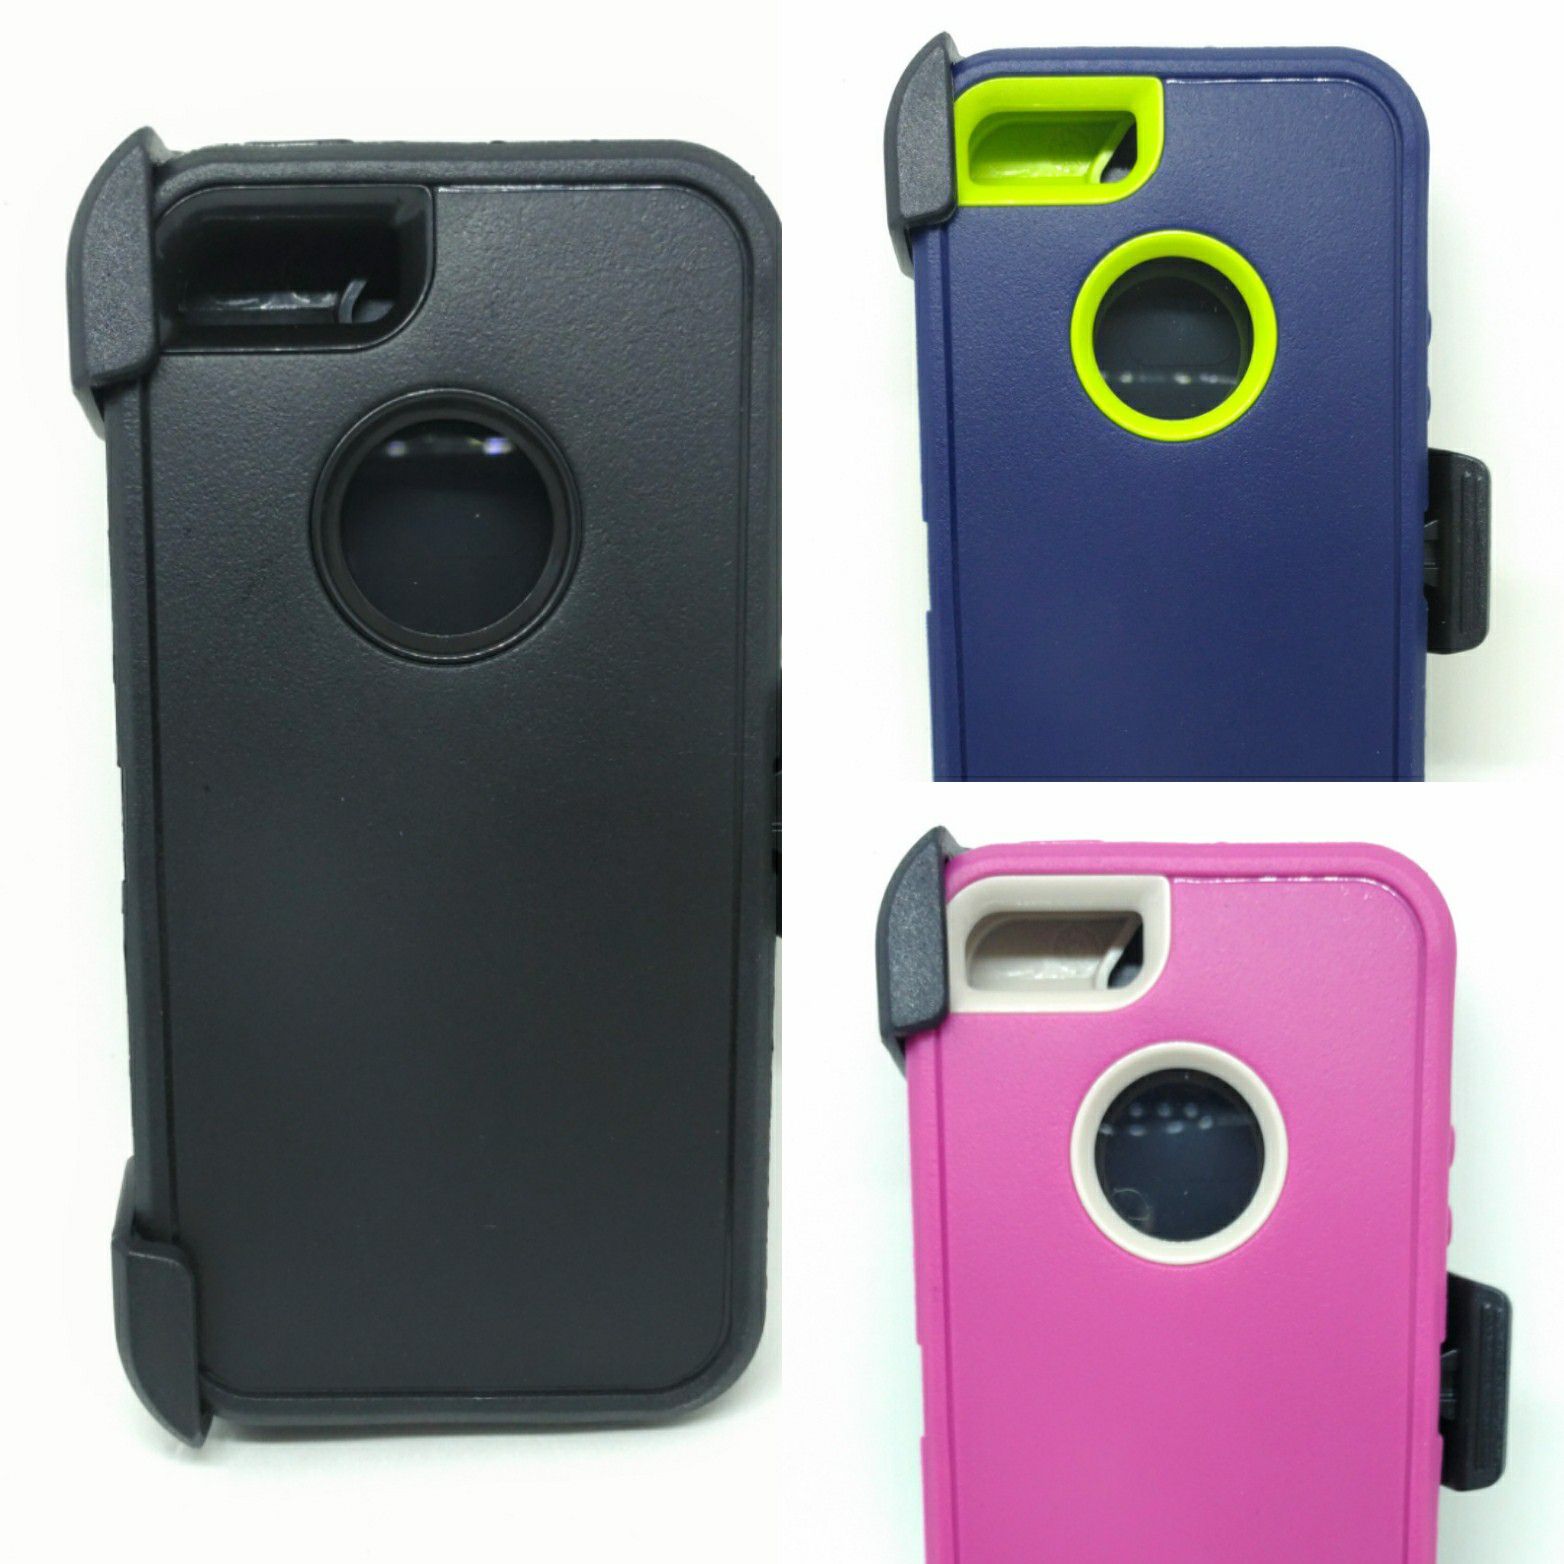 iPhone 5 Heavy Duty Cases